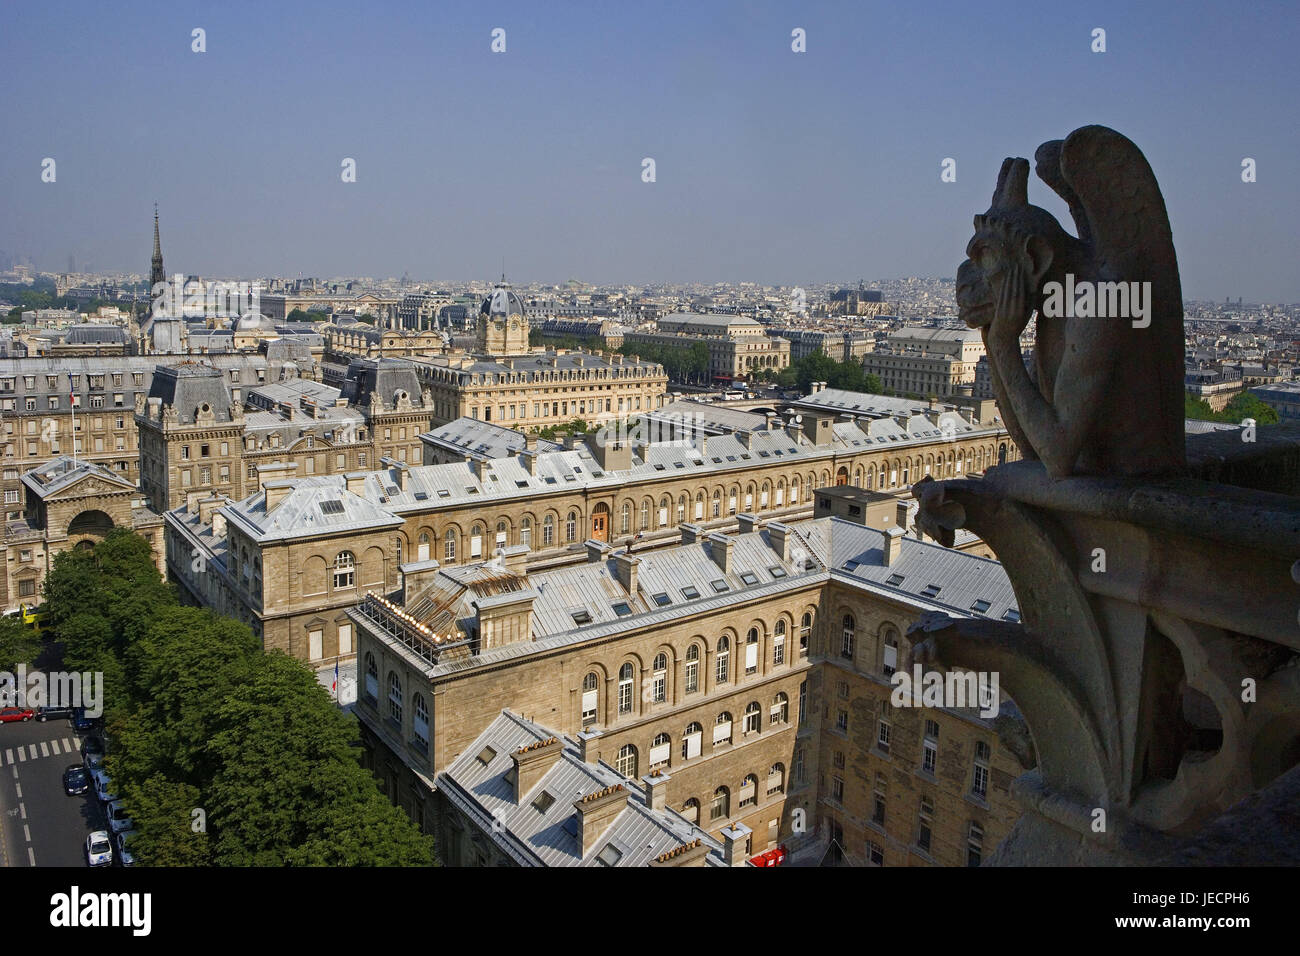 France, Paris, cathedral Notre lady, detail, defensive wall projection, sculpture, capital, church, structure, Gothic, sacred construction, Notre lady's cathedral, roof, roof bleed, gargoyle, place of interest, landmark, town overview, Stock Photo